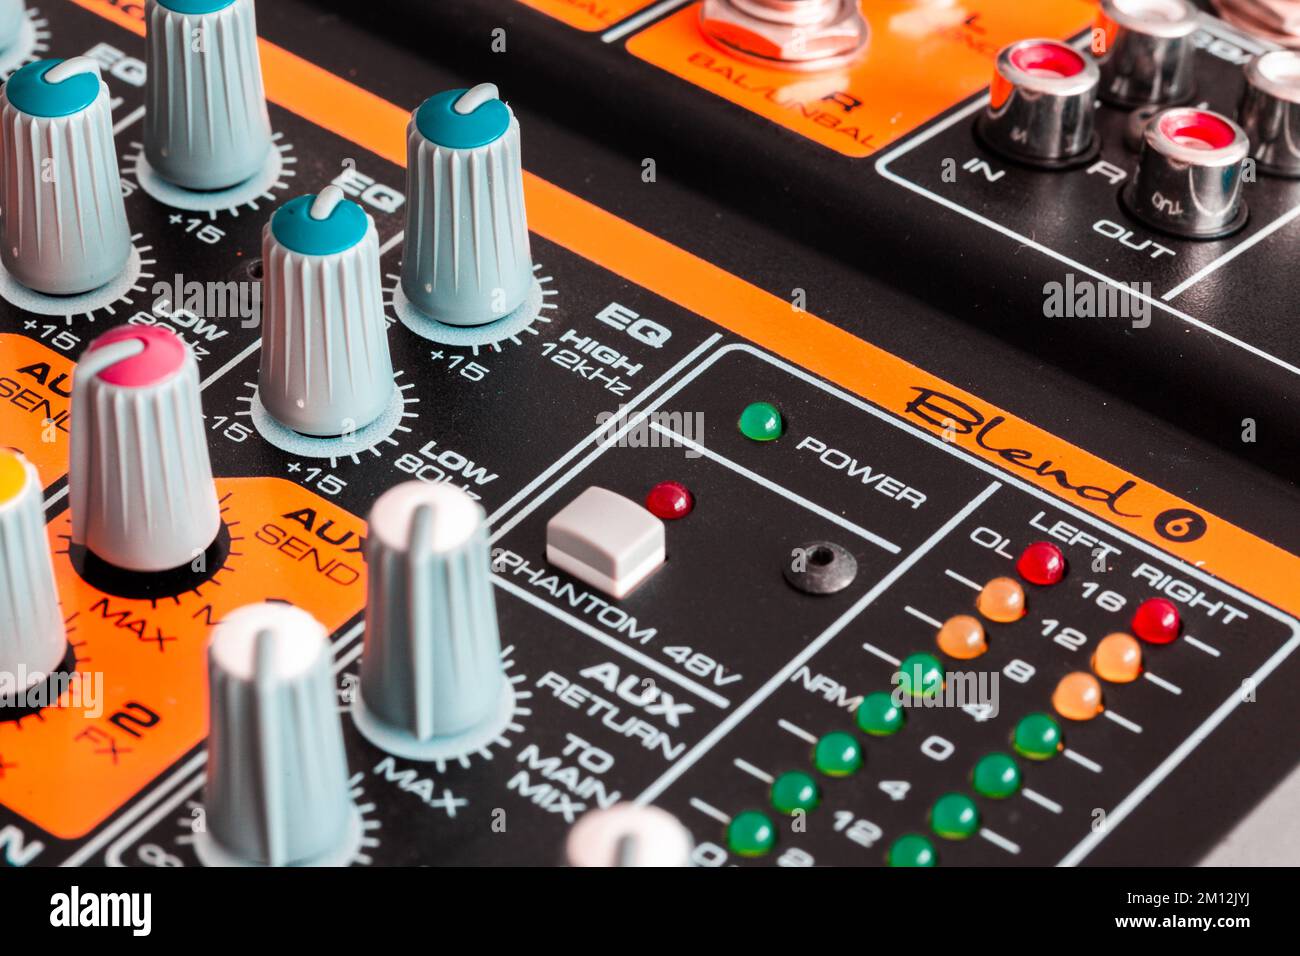 analog mixing pult for music Stock Photo